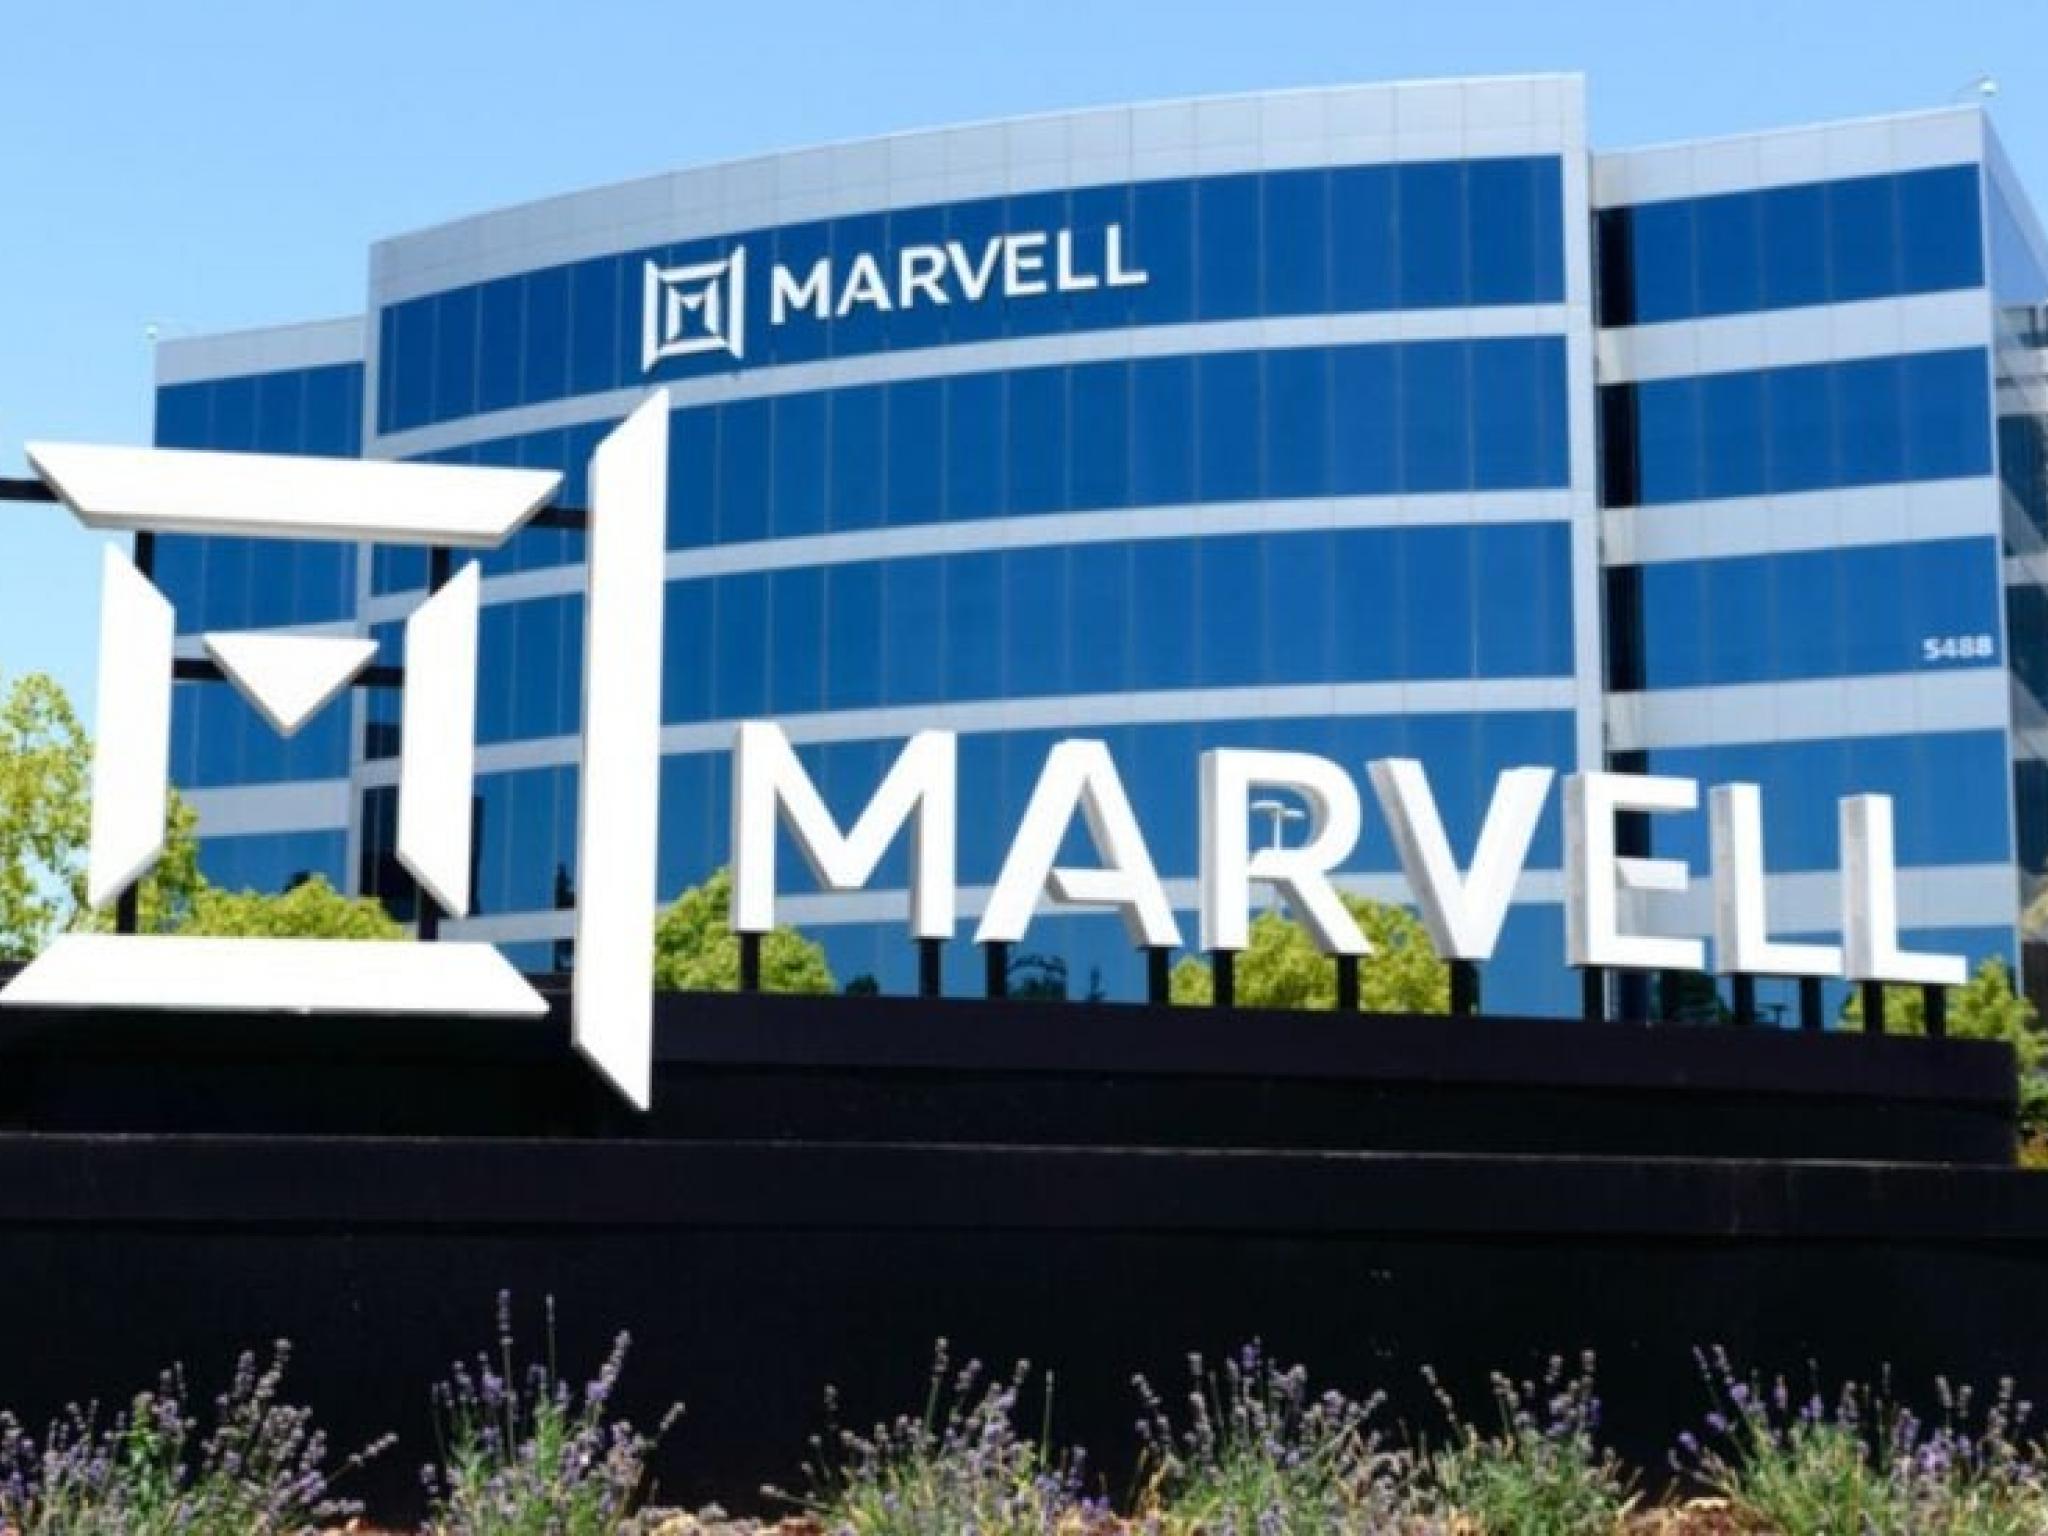  whats-going-on-with-marvell-technology-stock 